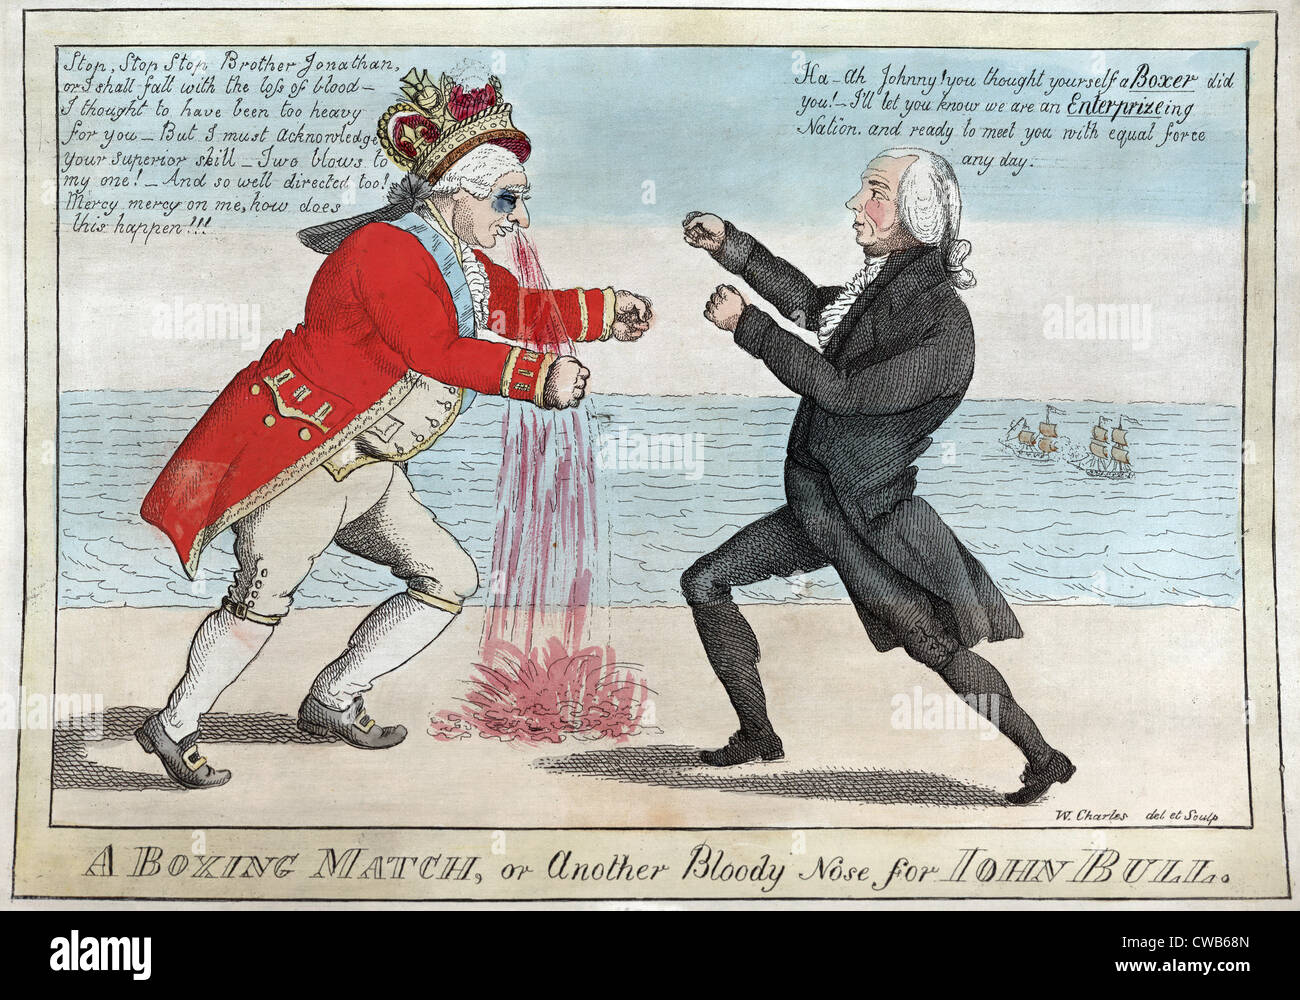 James Madison, 'A boxing match, or another bloody nose for John Bull', political cartoon ca. War of 1812, ca. 1813 Stock Photo